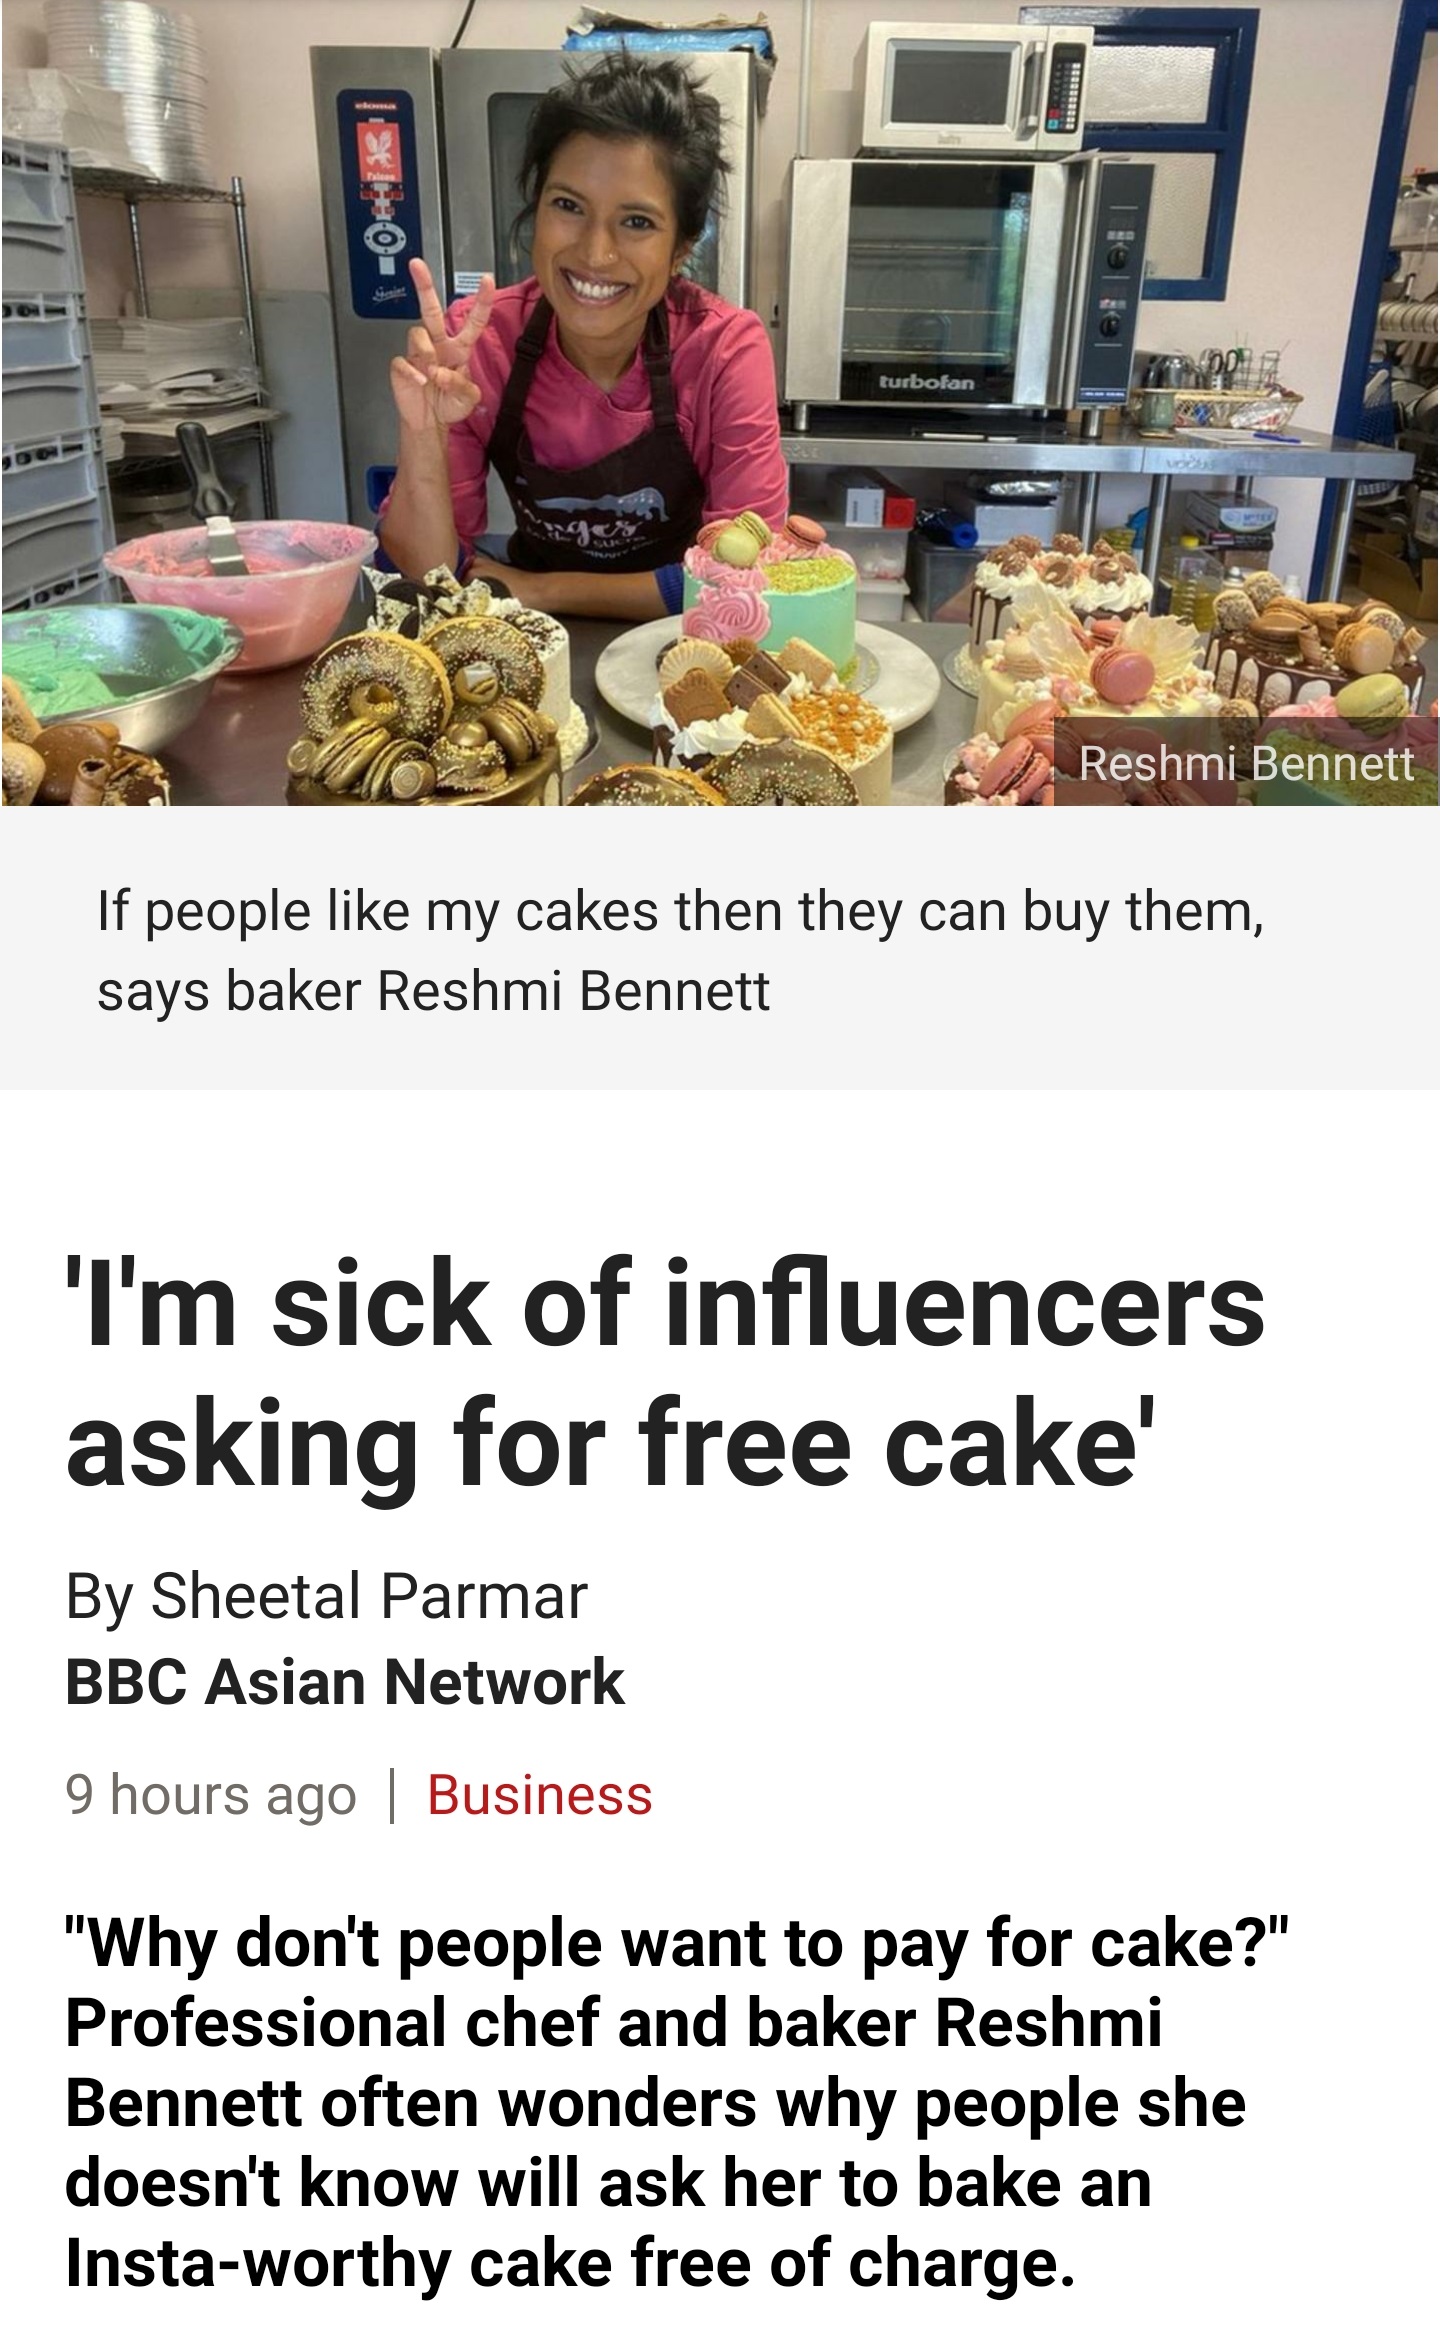 entitled people - 13 year old - Reshmi Bennett If people my cakes then they can buy them, says baker Reshmi Bennett I'm sick of influencers asking for free cake' By Sheetal Parmar Bbc Asian Network 9 hours ago | Business "Why don't people want to pay for 